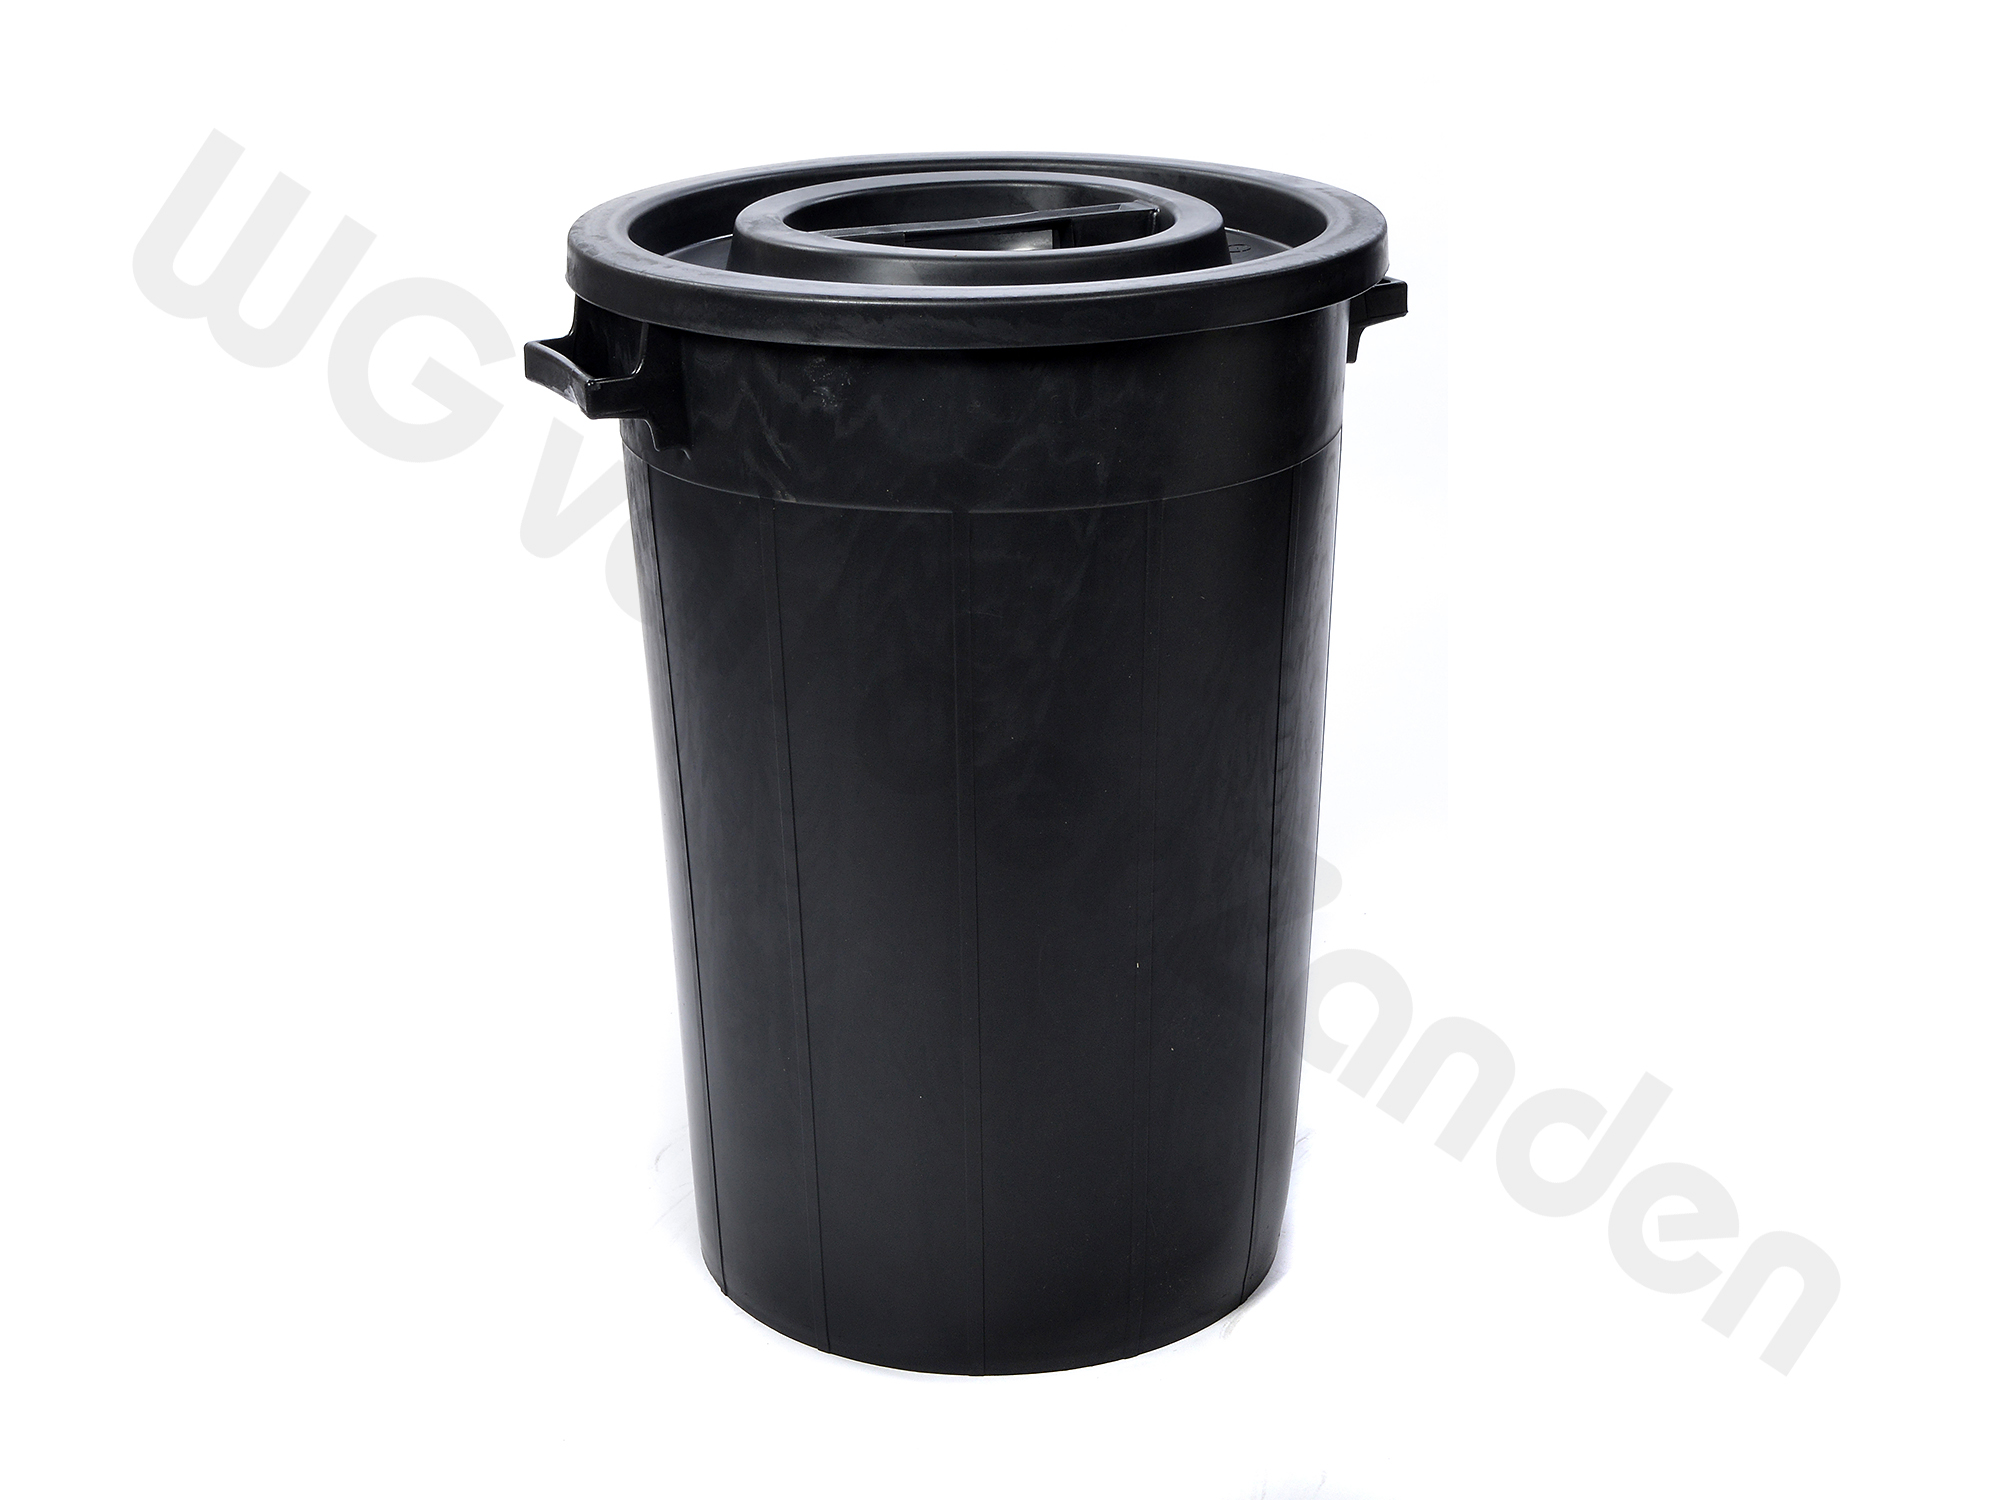 440036 GARBAGE BIN PLASTIC 120 LTR ROUND WITH COVER BLACK